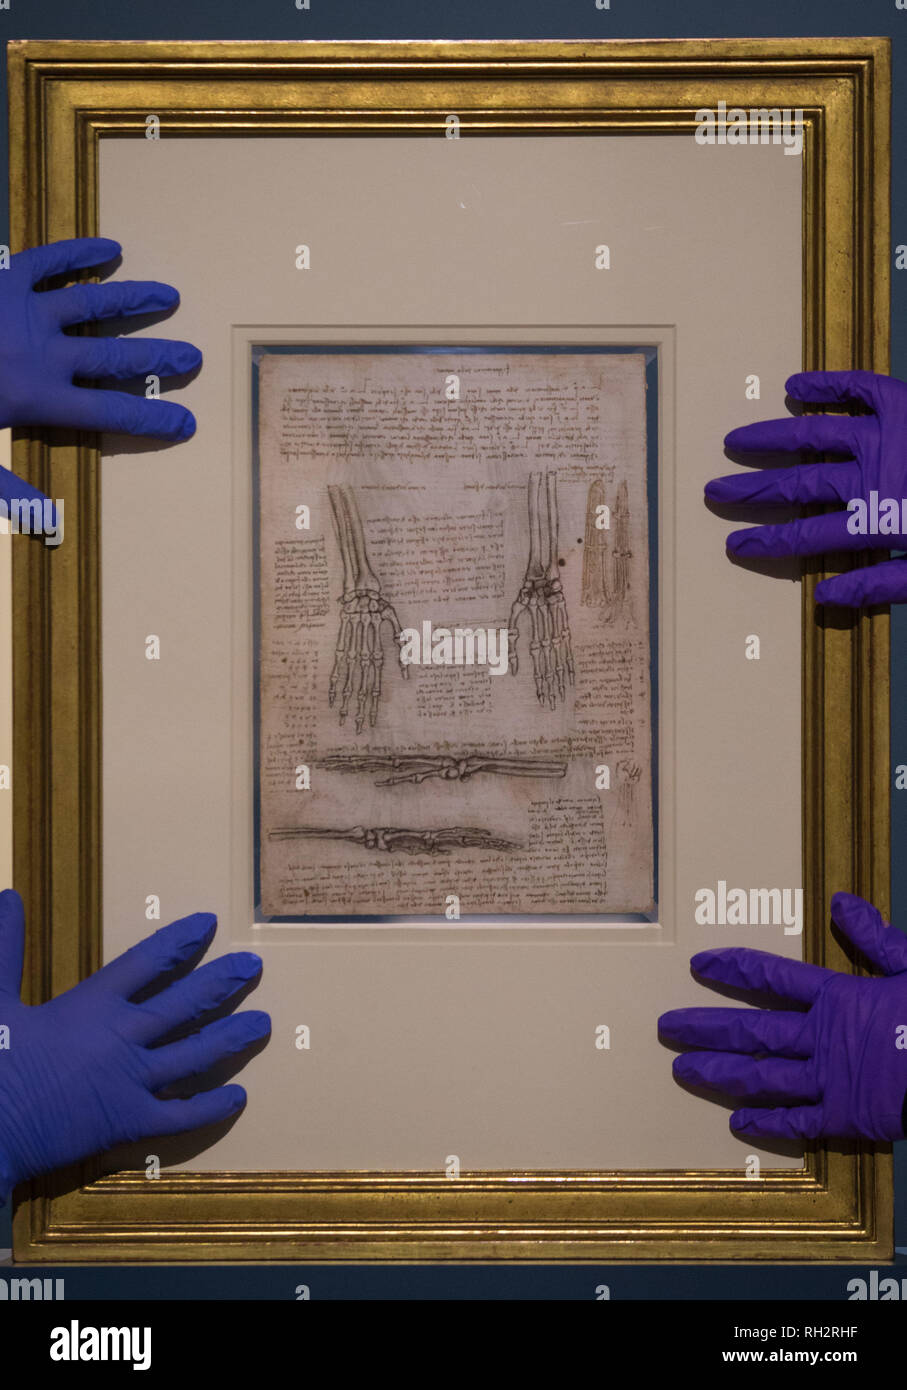 Two gallery assistants adjust 'The bones, muscles and tendons of the hand c.1510-11' as 12 drawings by Leonardo da Vinci go on display at Birmingham Museum & Art Gallery ahead of the opening of an exhibition to mark the 500th anniversary of the Renaissance master's death. Stock Photo